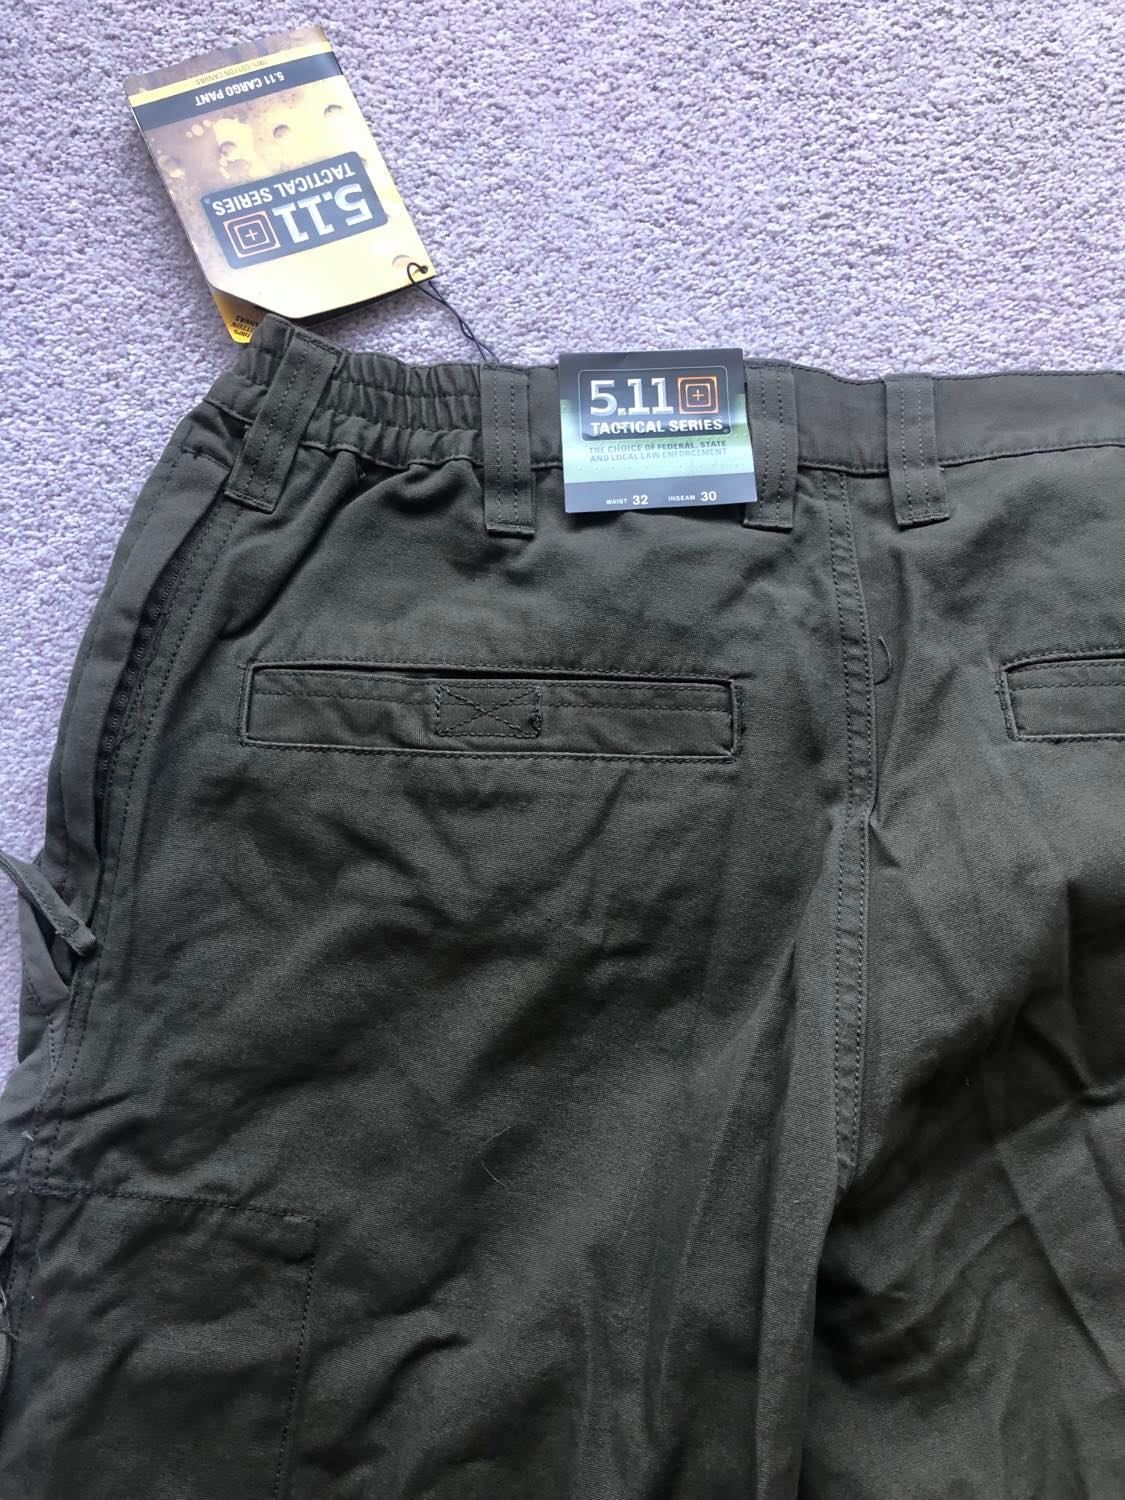 5.11 Tactical Pants 32x30 Green New with tags unworn - Gear - Airsoft ...